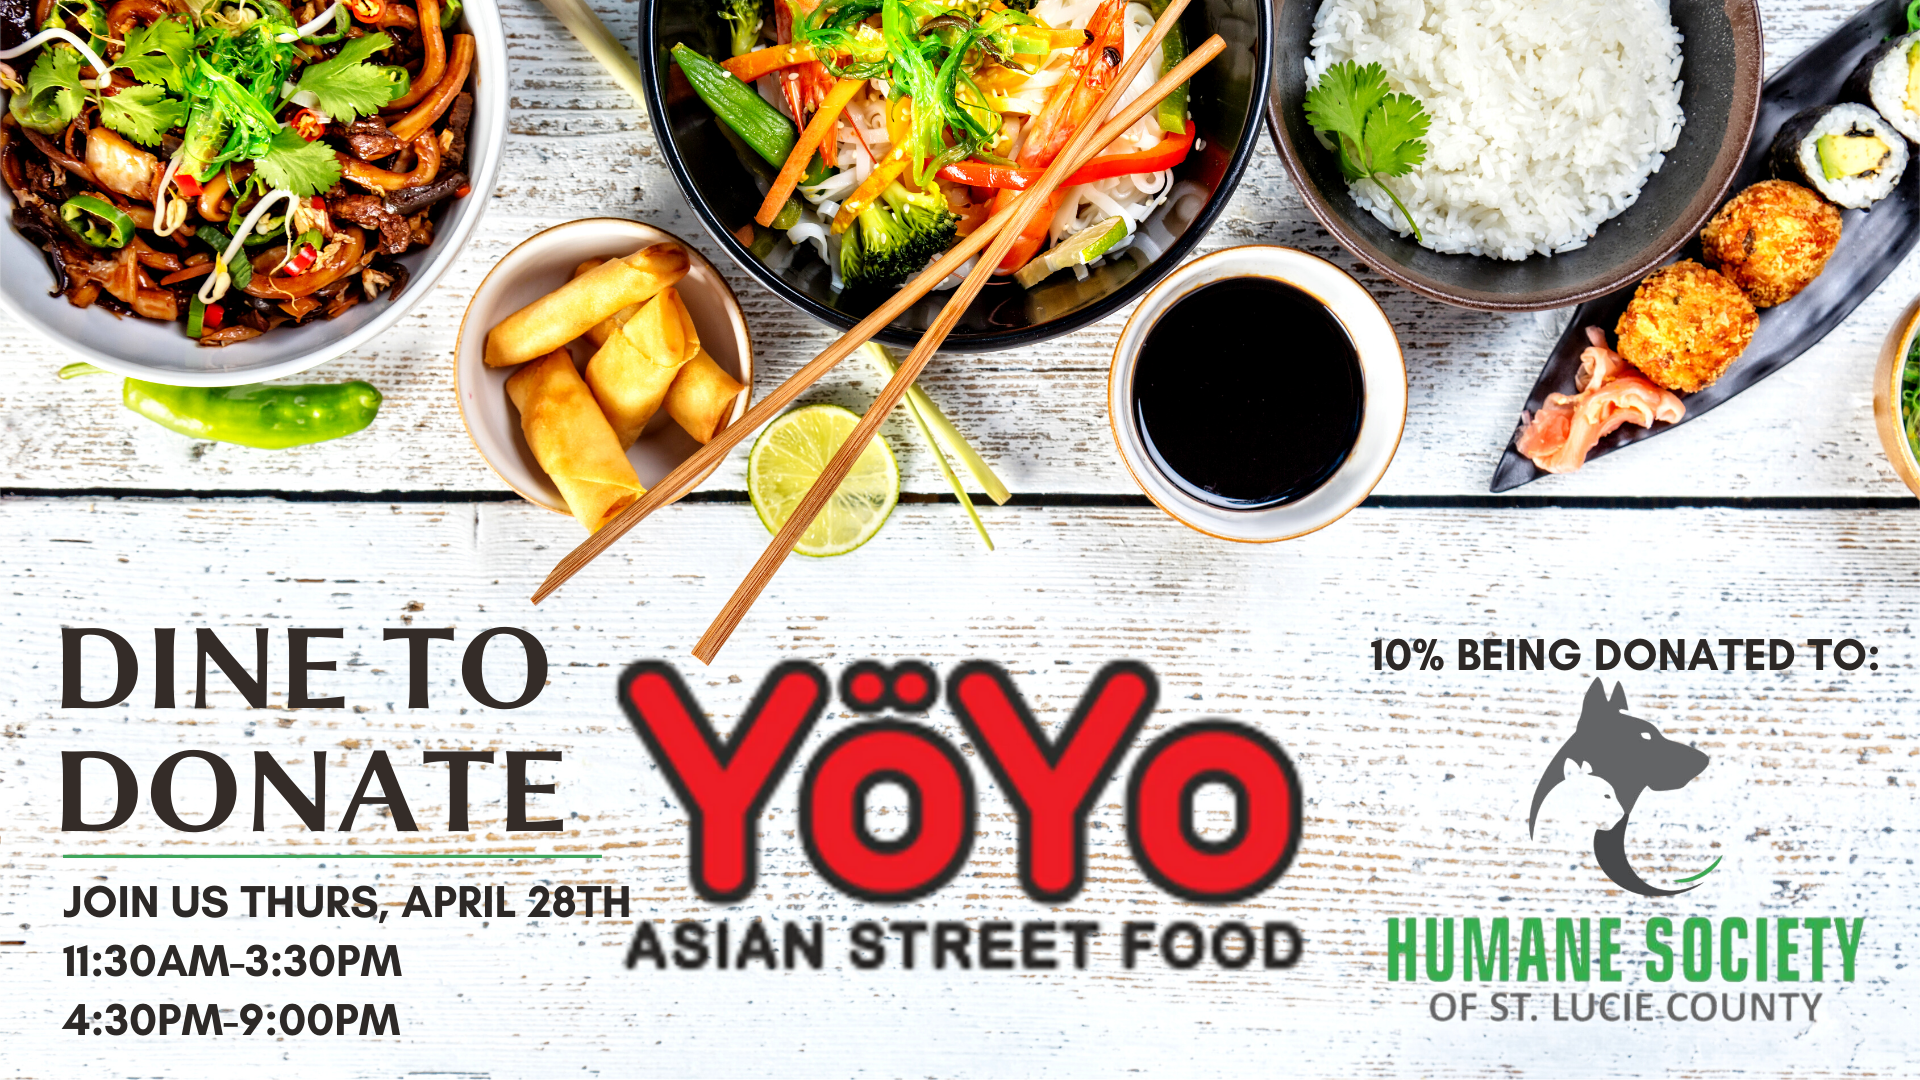 Dine to Donate at YoYo Asian Street Food